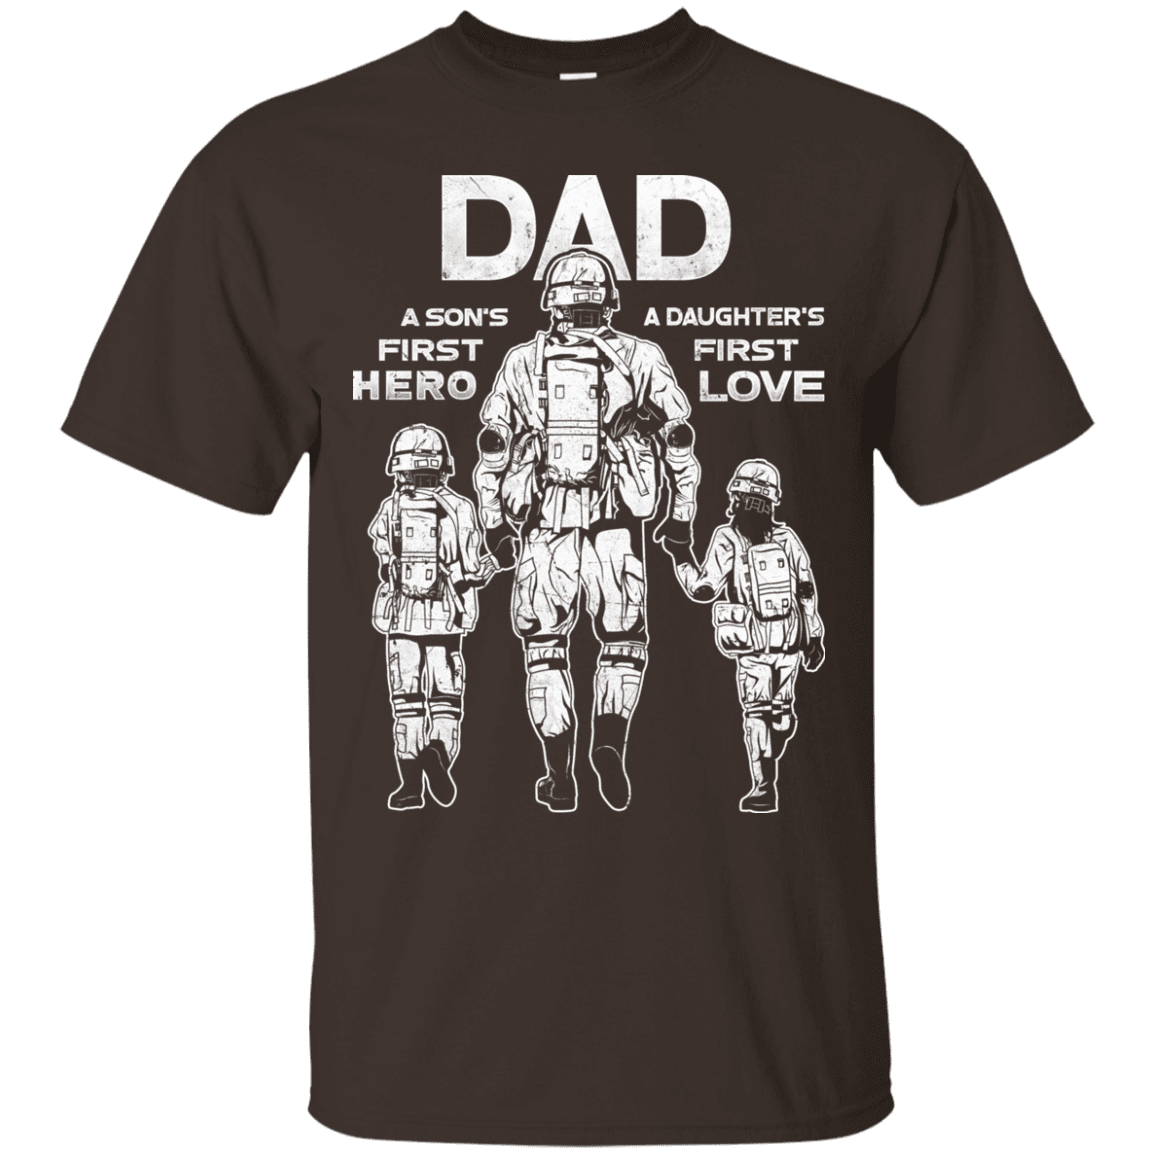 Military T-Shirt "Dad A Son's First Hero Daughter's First Love Men" Front-TShirt-General-Veterans Nation